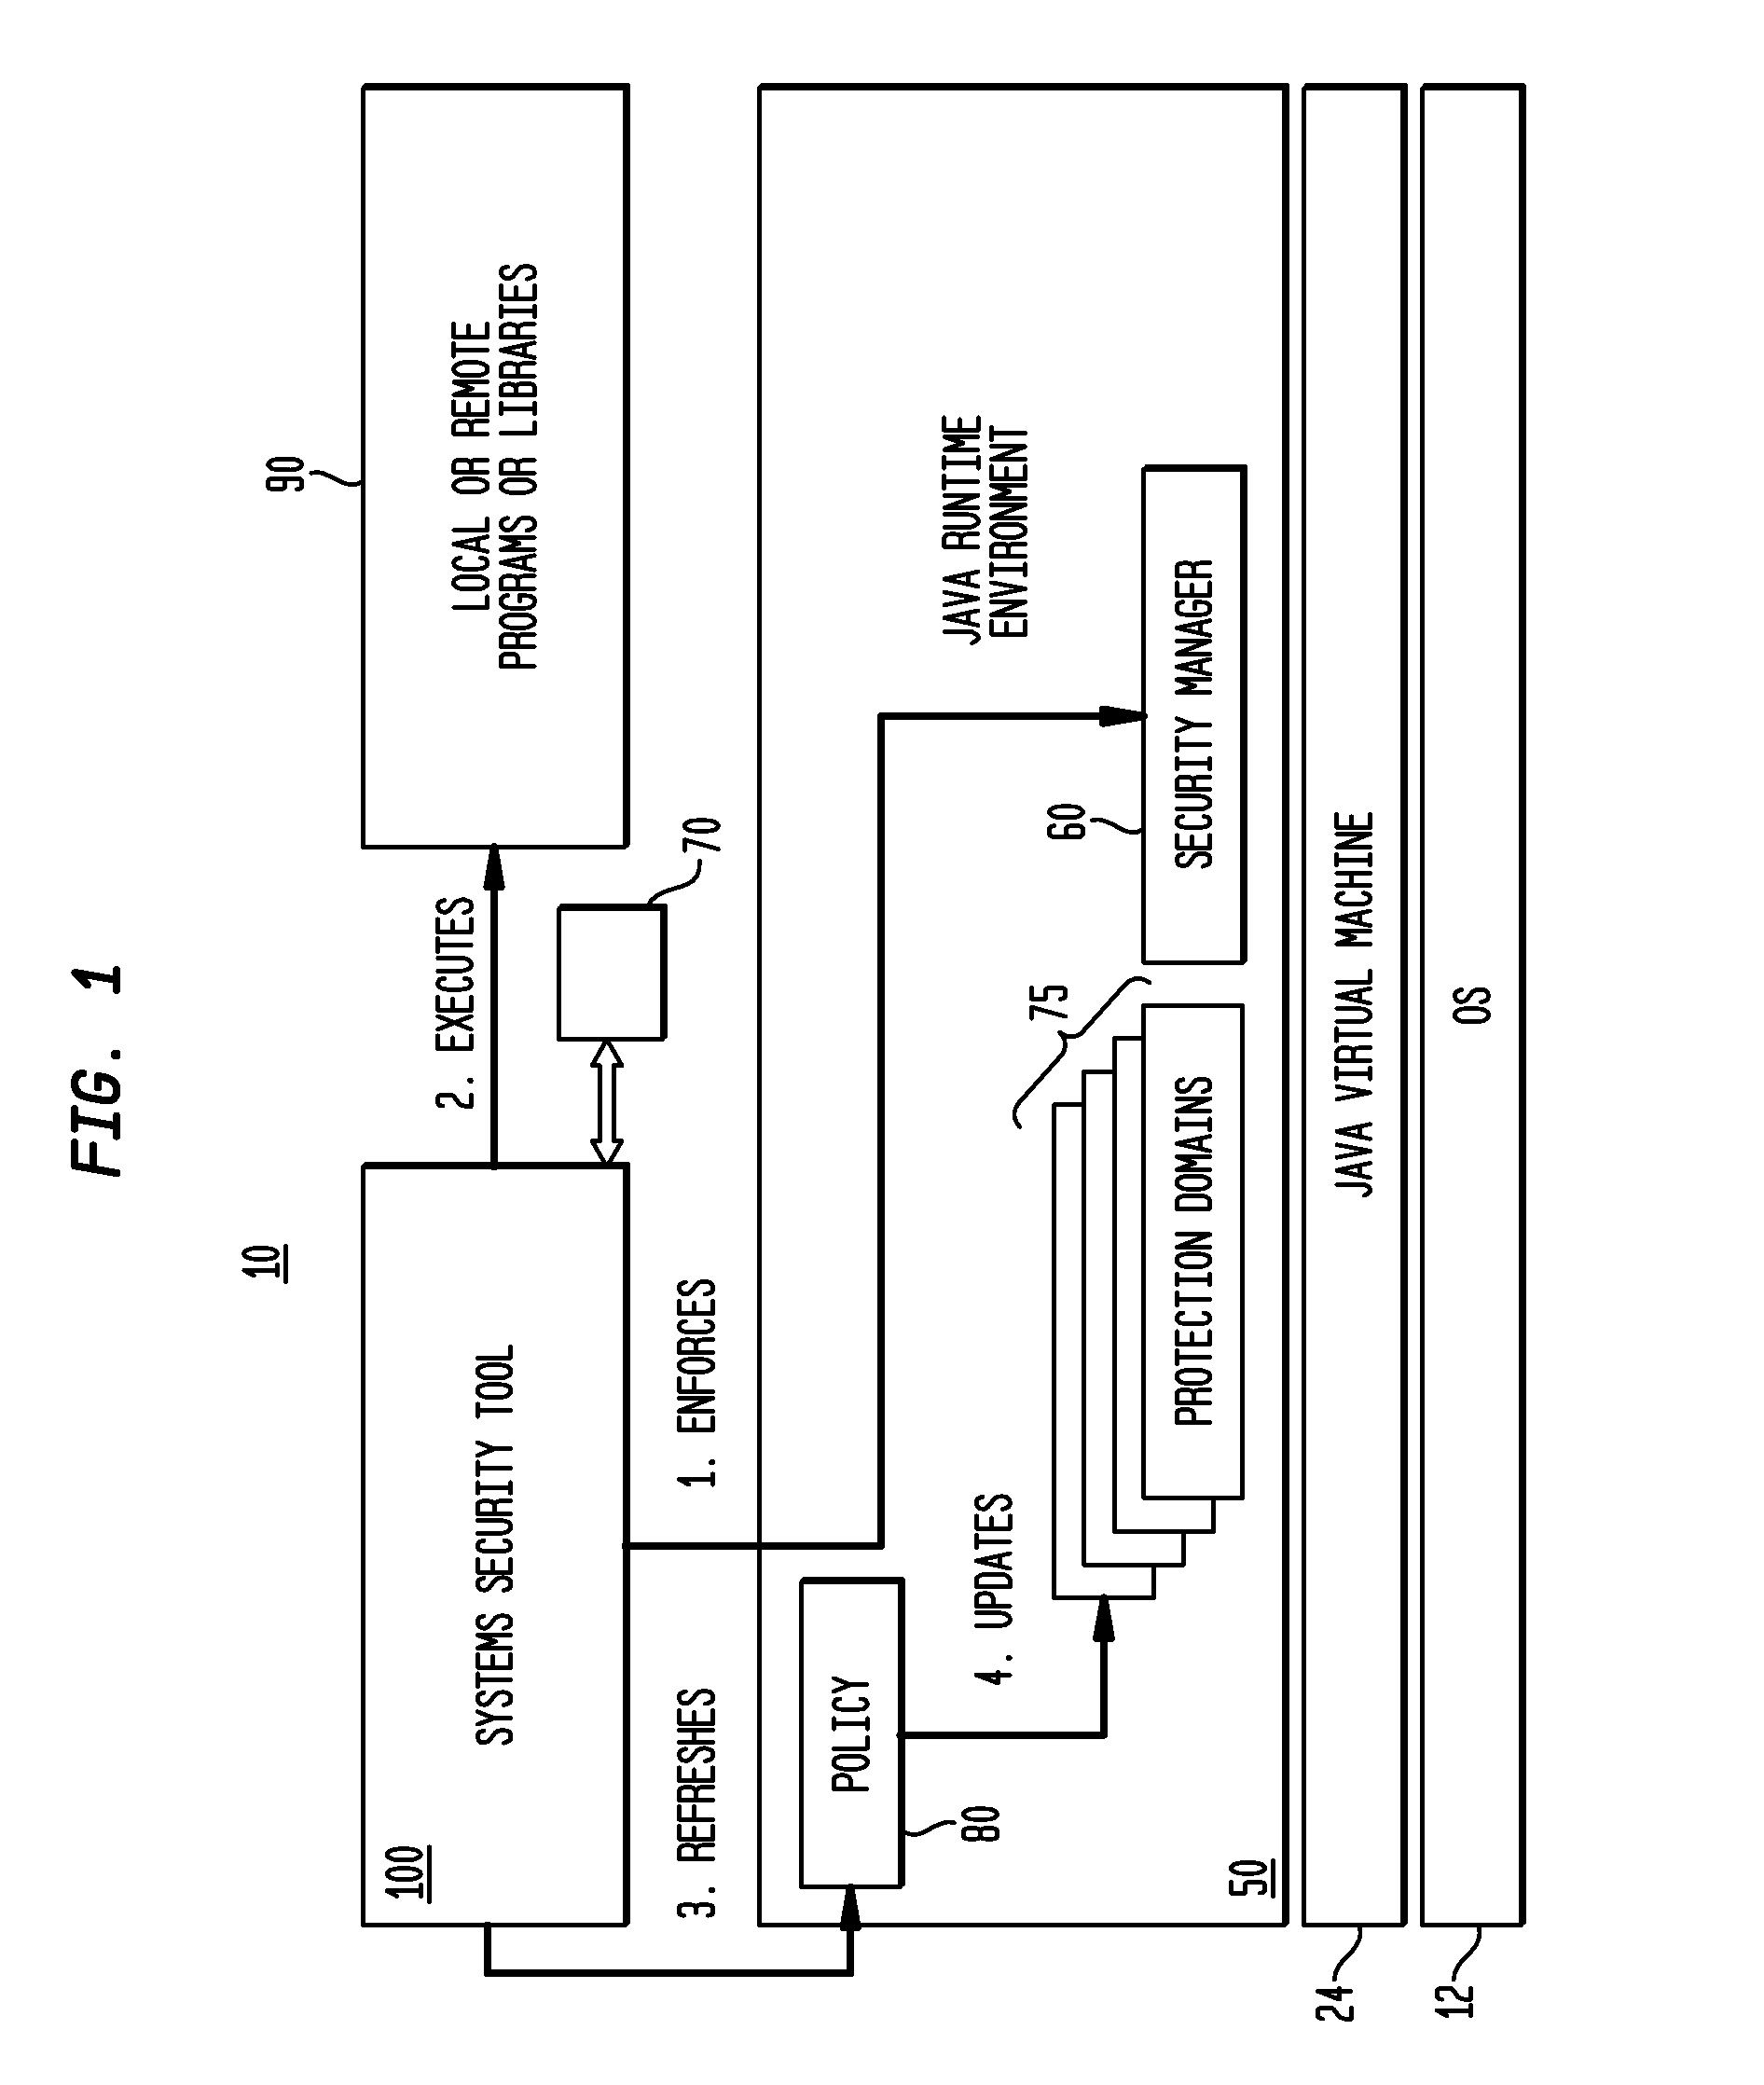 Method and system for run-time dynamic and interactive identification of software authorization requirements and privileged code locations, and for validation of other software program analysis results